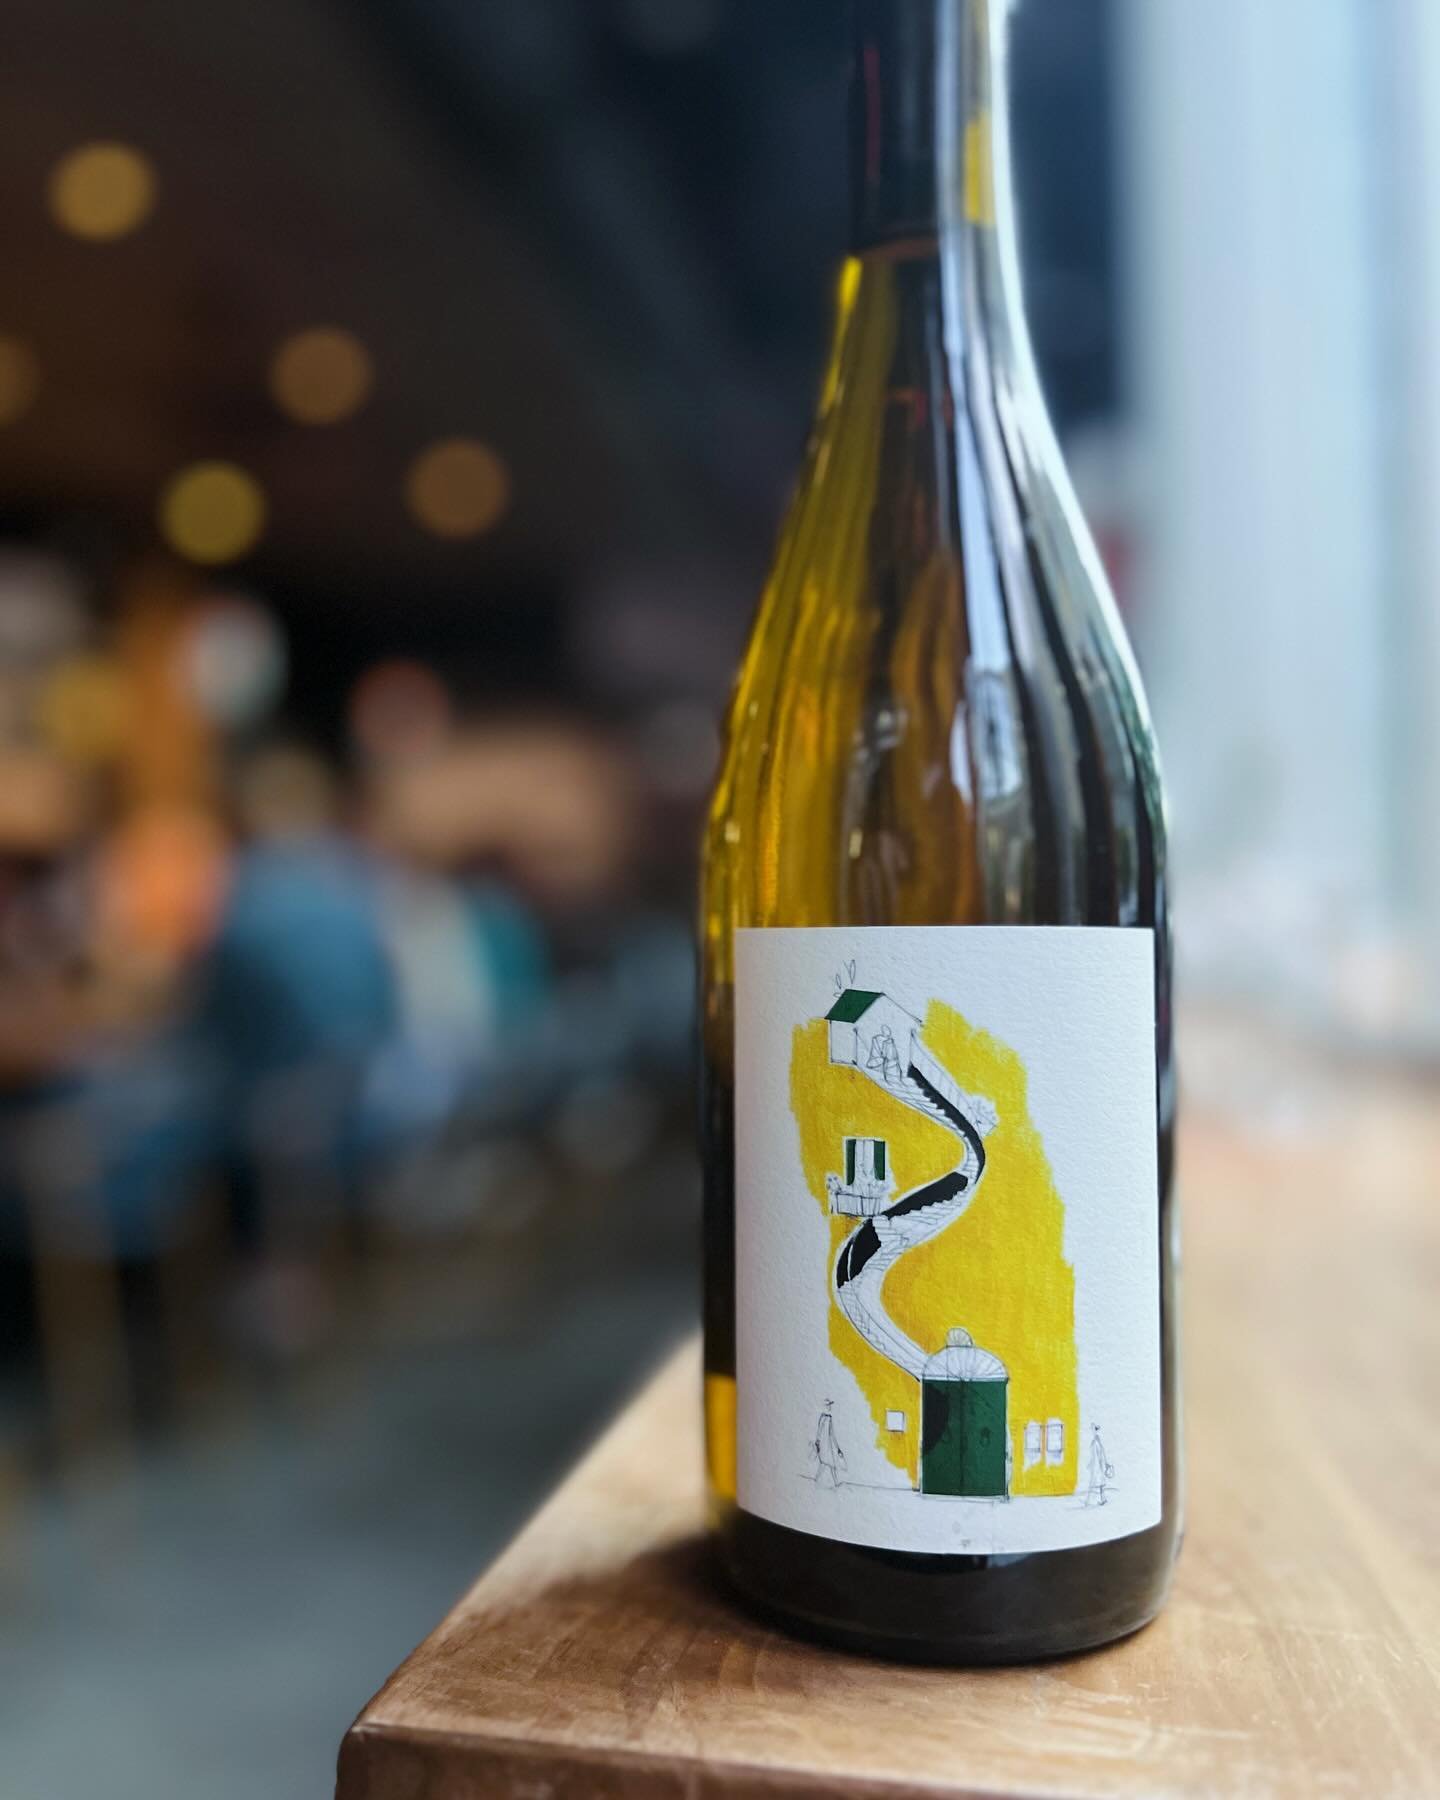 Today's forecast calls for sunny skies and this little gem from winemaker @pino.roman - notes of quince, white pear, lime, lemon, mandarin &amp; padron pepper make this Chilean vino a #totalcrush show. It drinks like an elegant flower yet delivers li